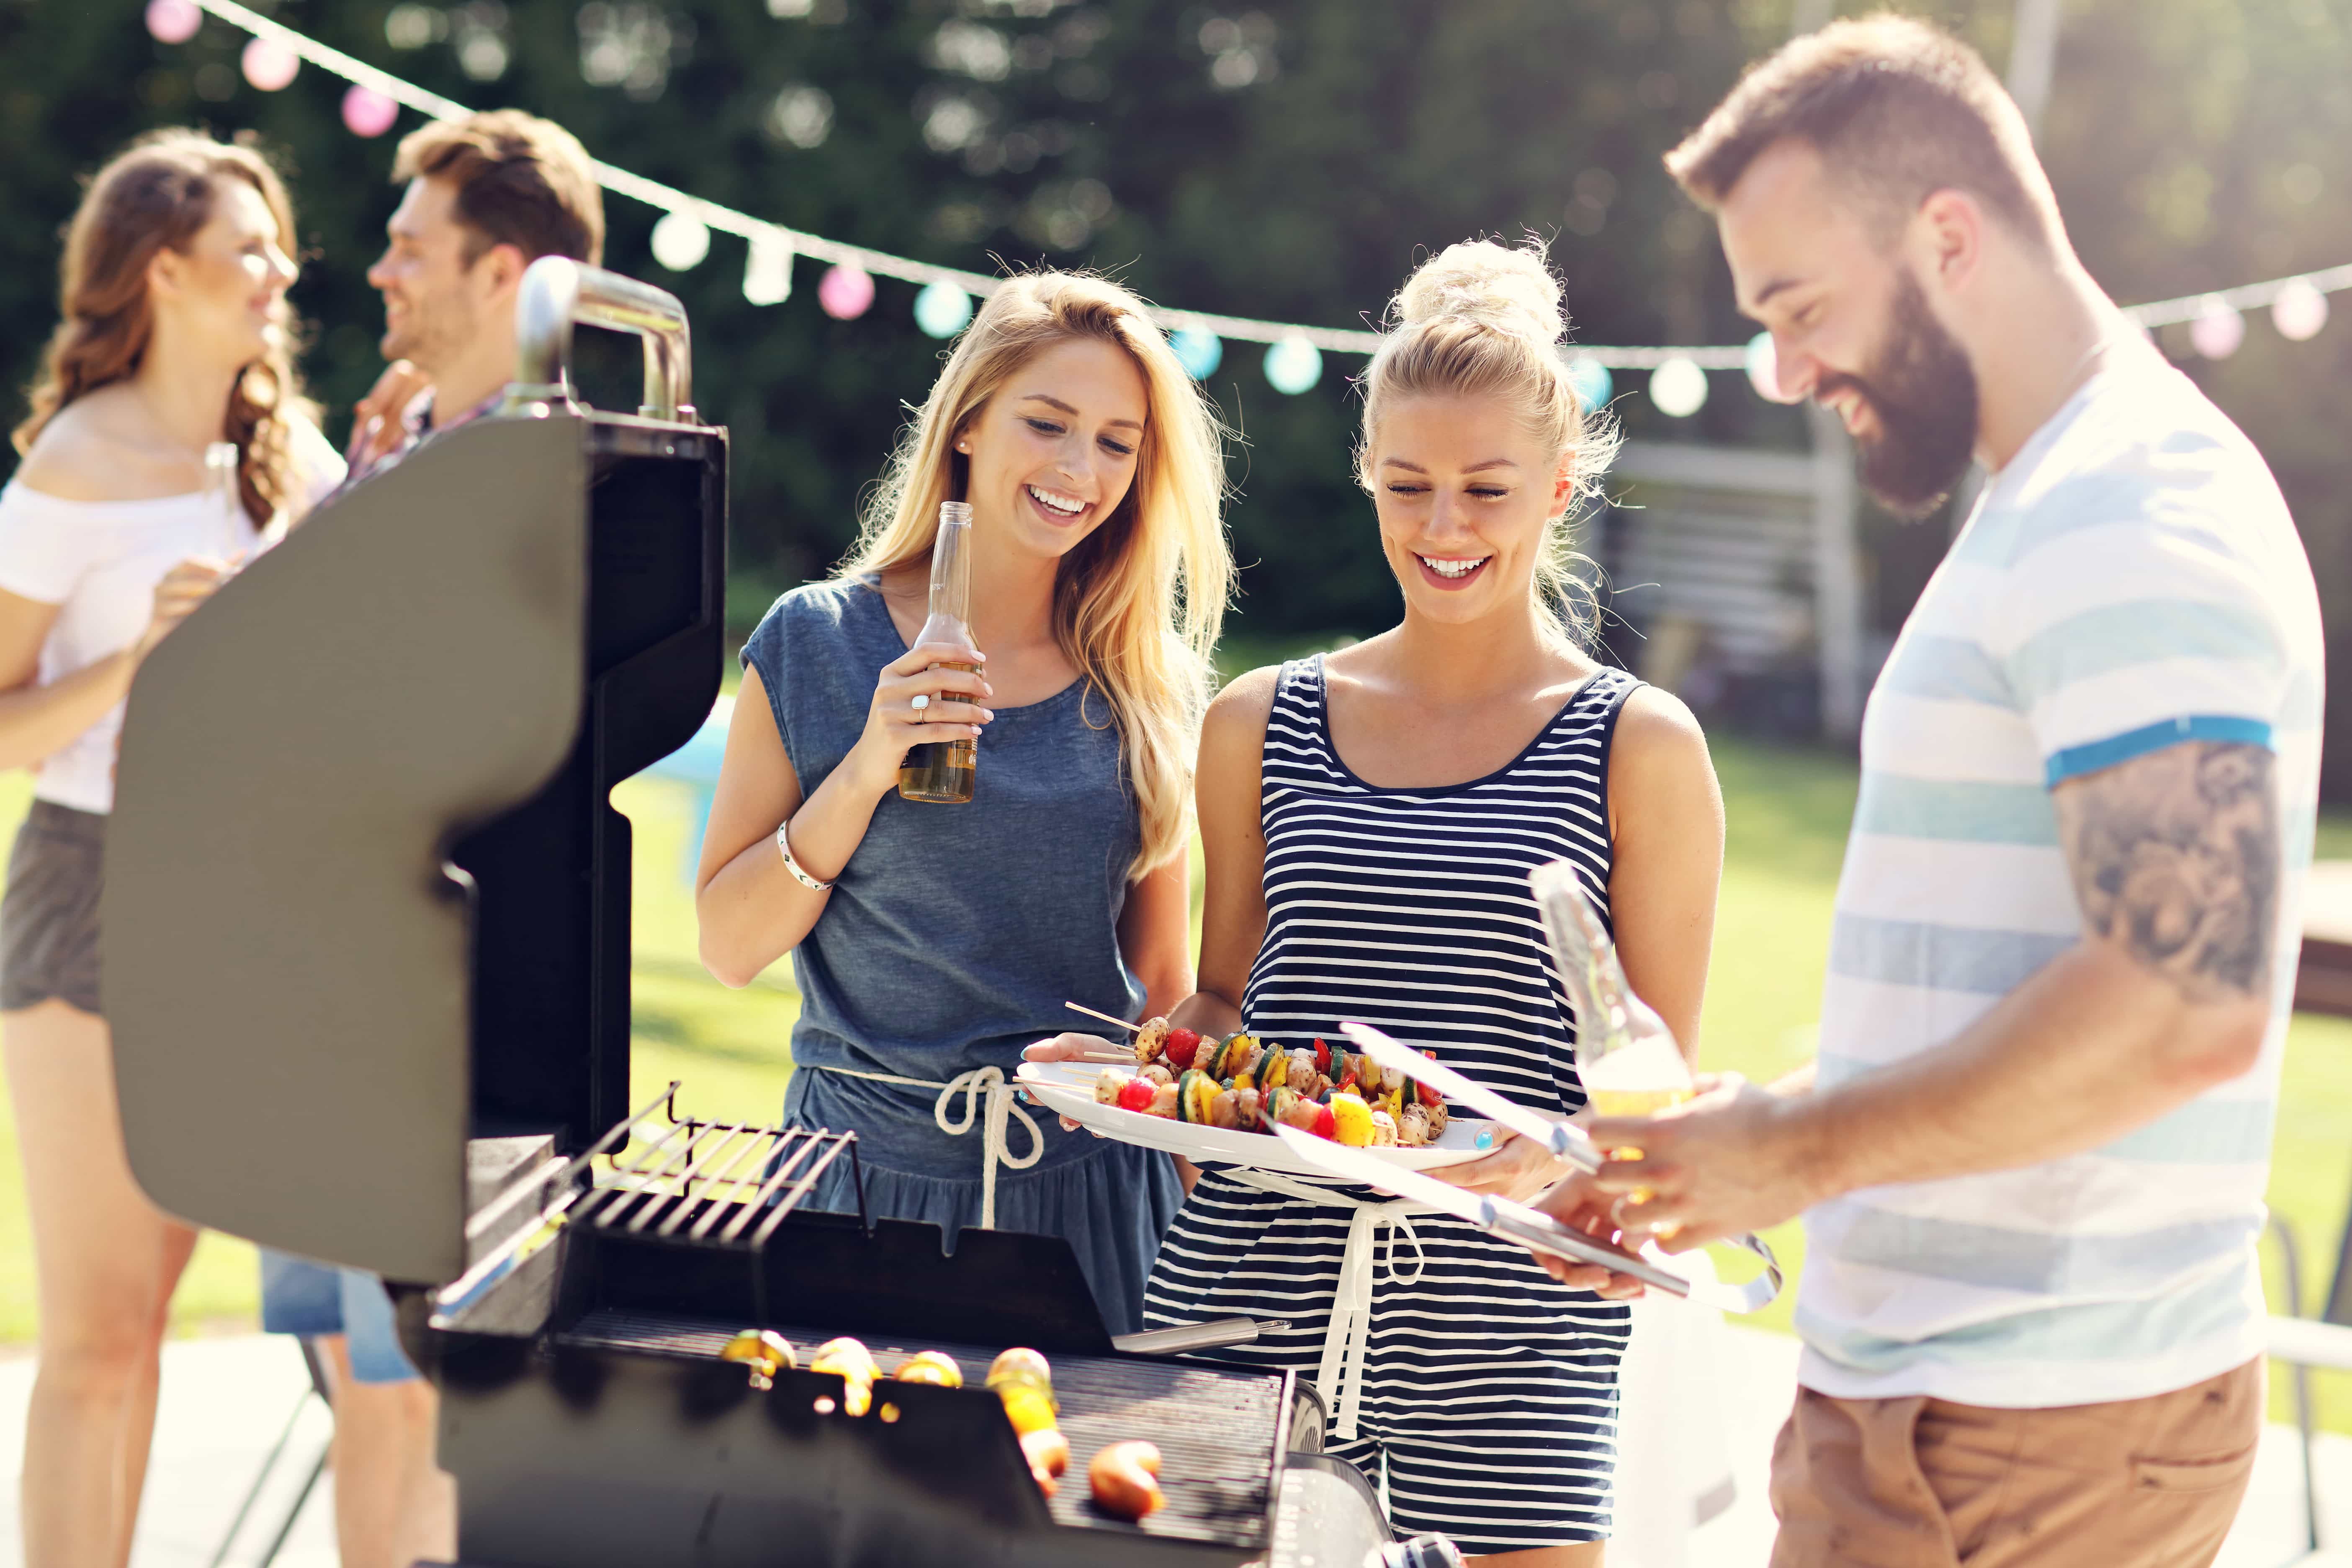 How To Plan The Ultimate Backyard Barbecue?